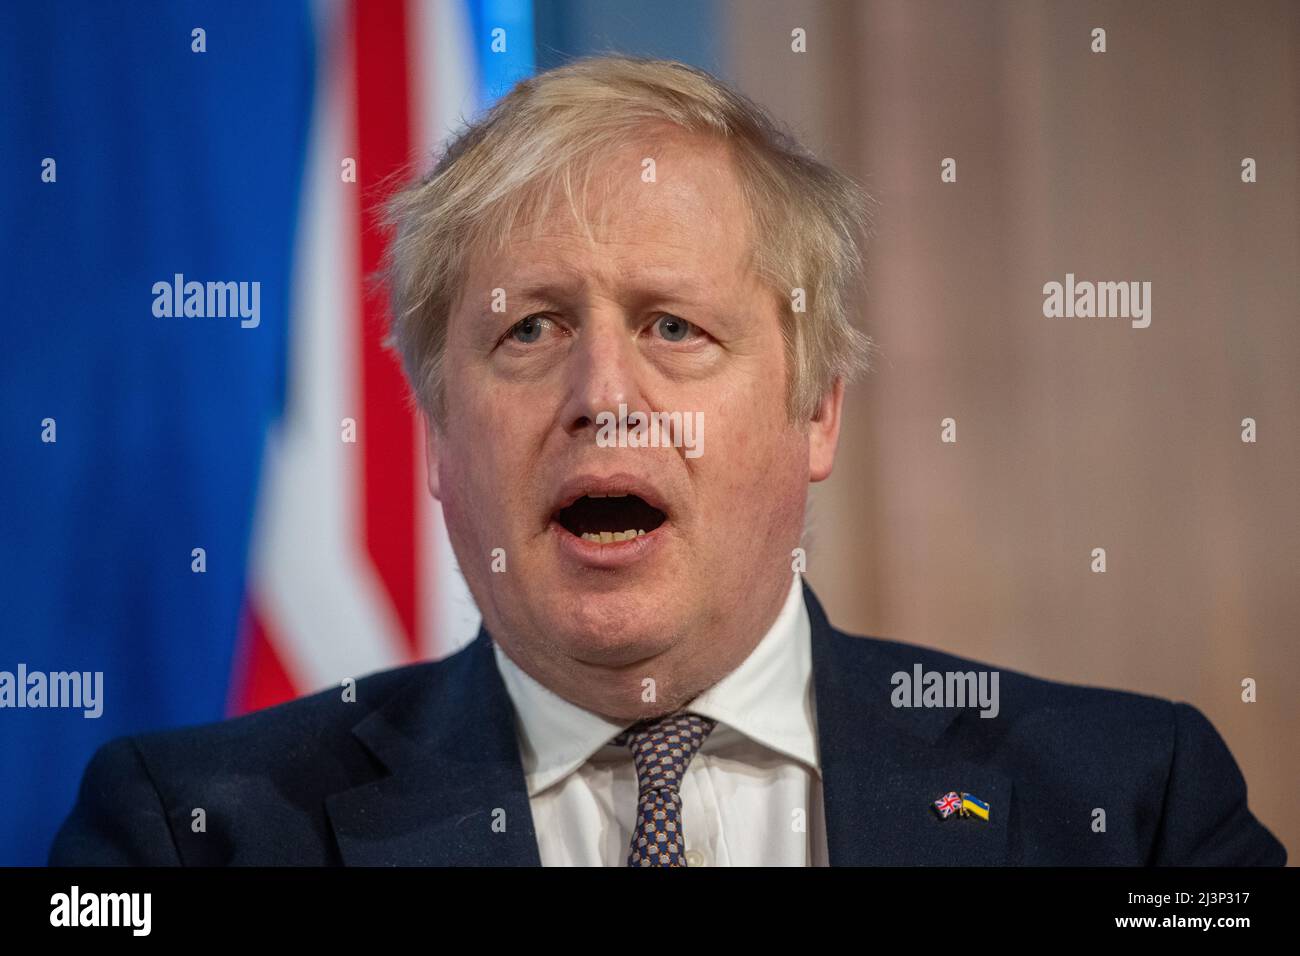 London, UK. 08th Apr, 2022. Boris Johnson, Prime Minister of the United Kingdom, speaks at a press conference after talks with Chancellor Scholz. Credit: Michael Kappeler/dpa/Alamy Live News Stock Photo